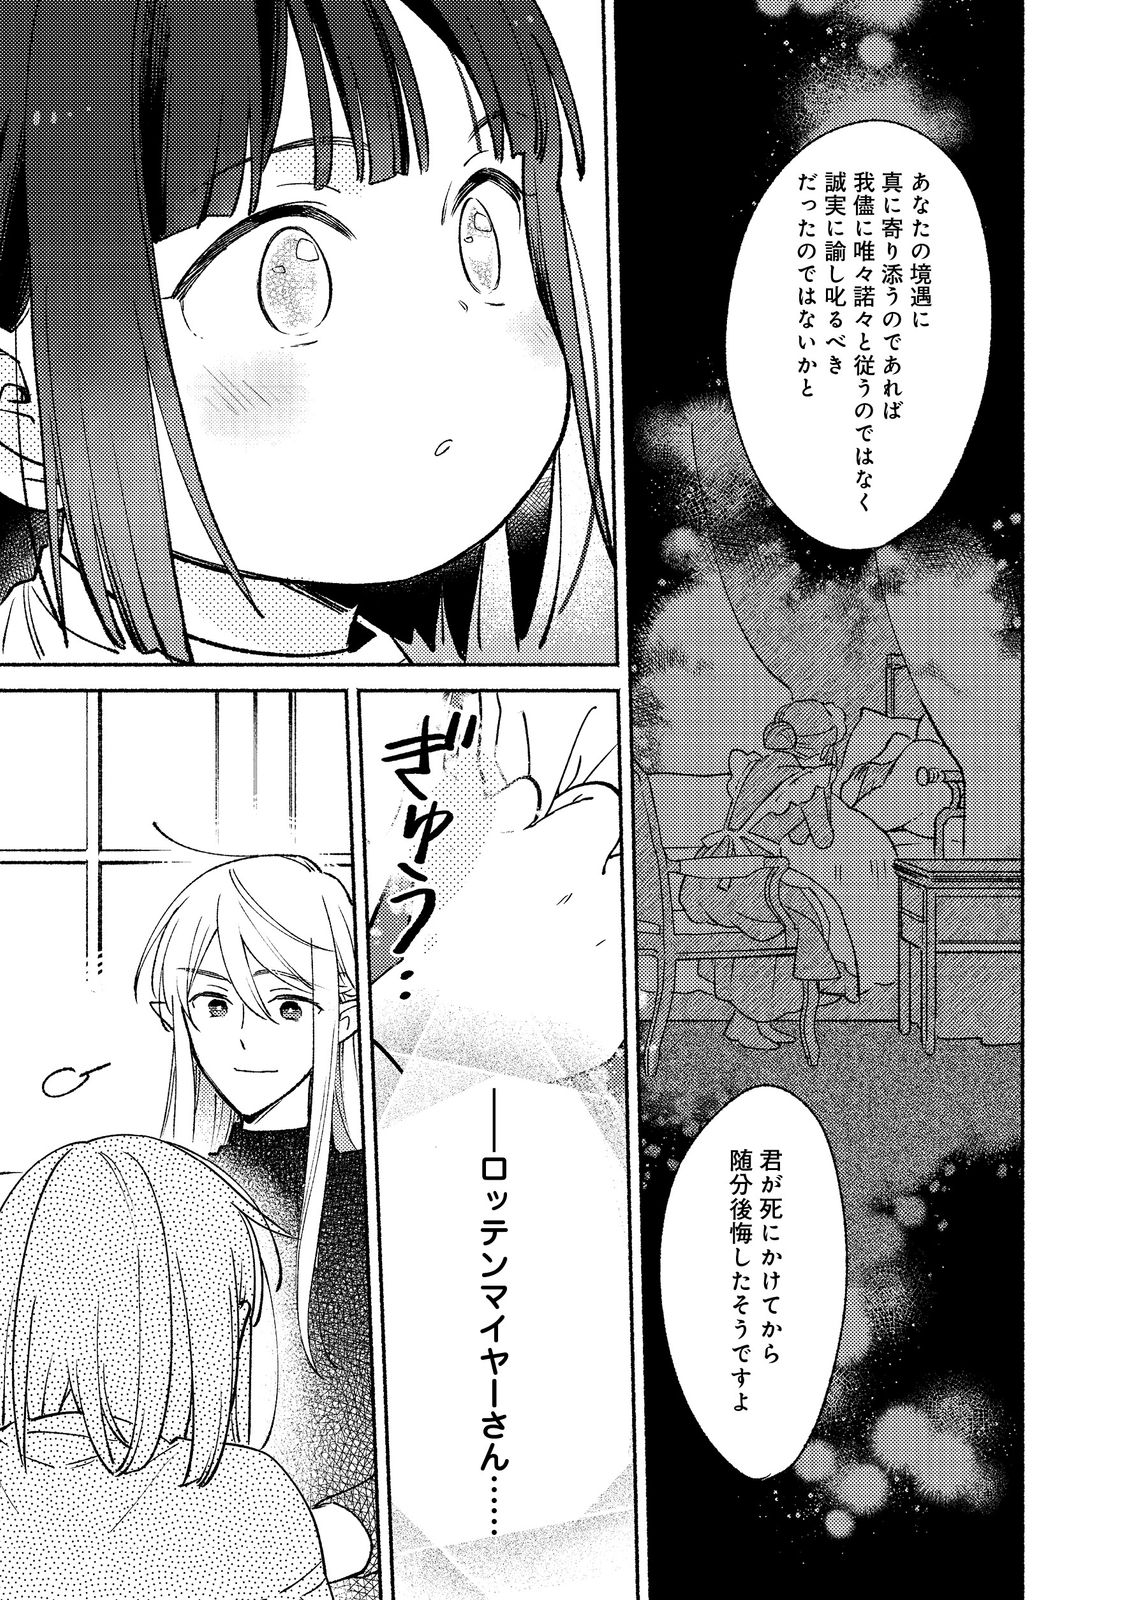 I’m the White Pig Nobleman 第16.2話 - Page 1